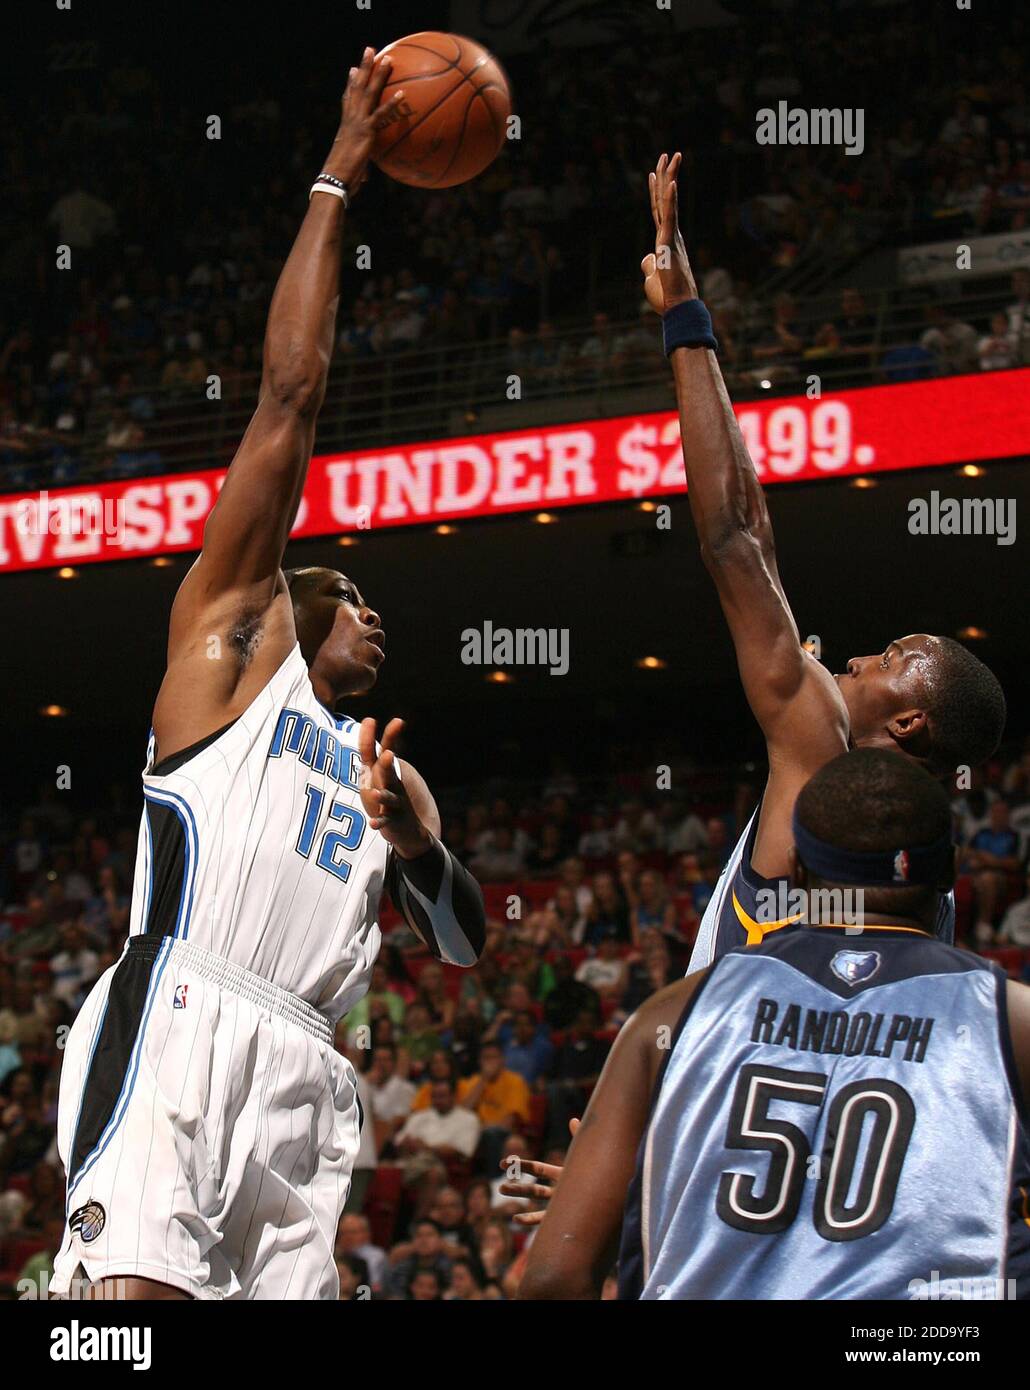 NO FILM, NO VIDEO, NO TV, NO DOCUMENTARY - Orlando Magic center Dwight Howard scores over Memphis Grizzlies forward Zach Randolph during an NBA game at Amway Arena in Orlando, FL, USA on April 4, 2010. Photo by Stephen M. Dowell/Orlando Sentinel/MCT/Cameleon/ABACAPRESS.COM Stock Photo